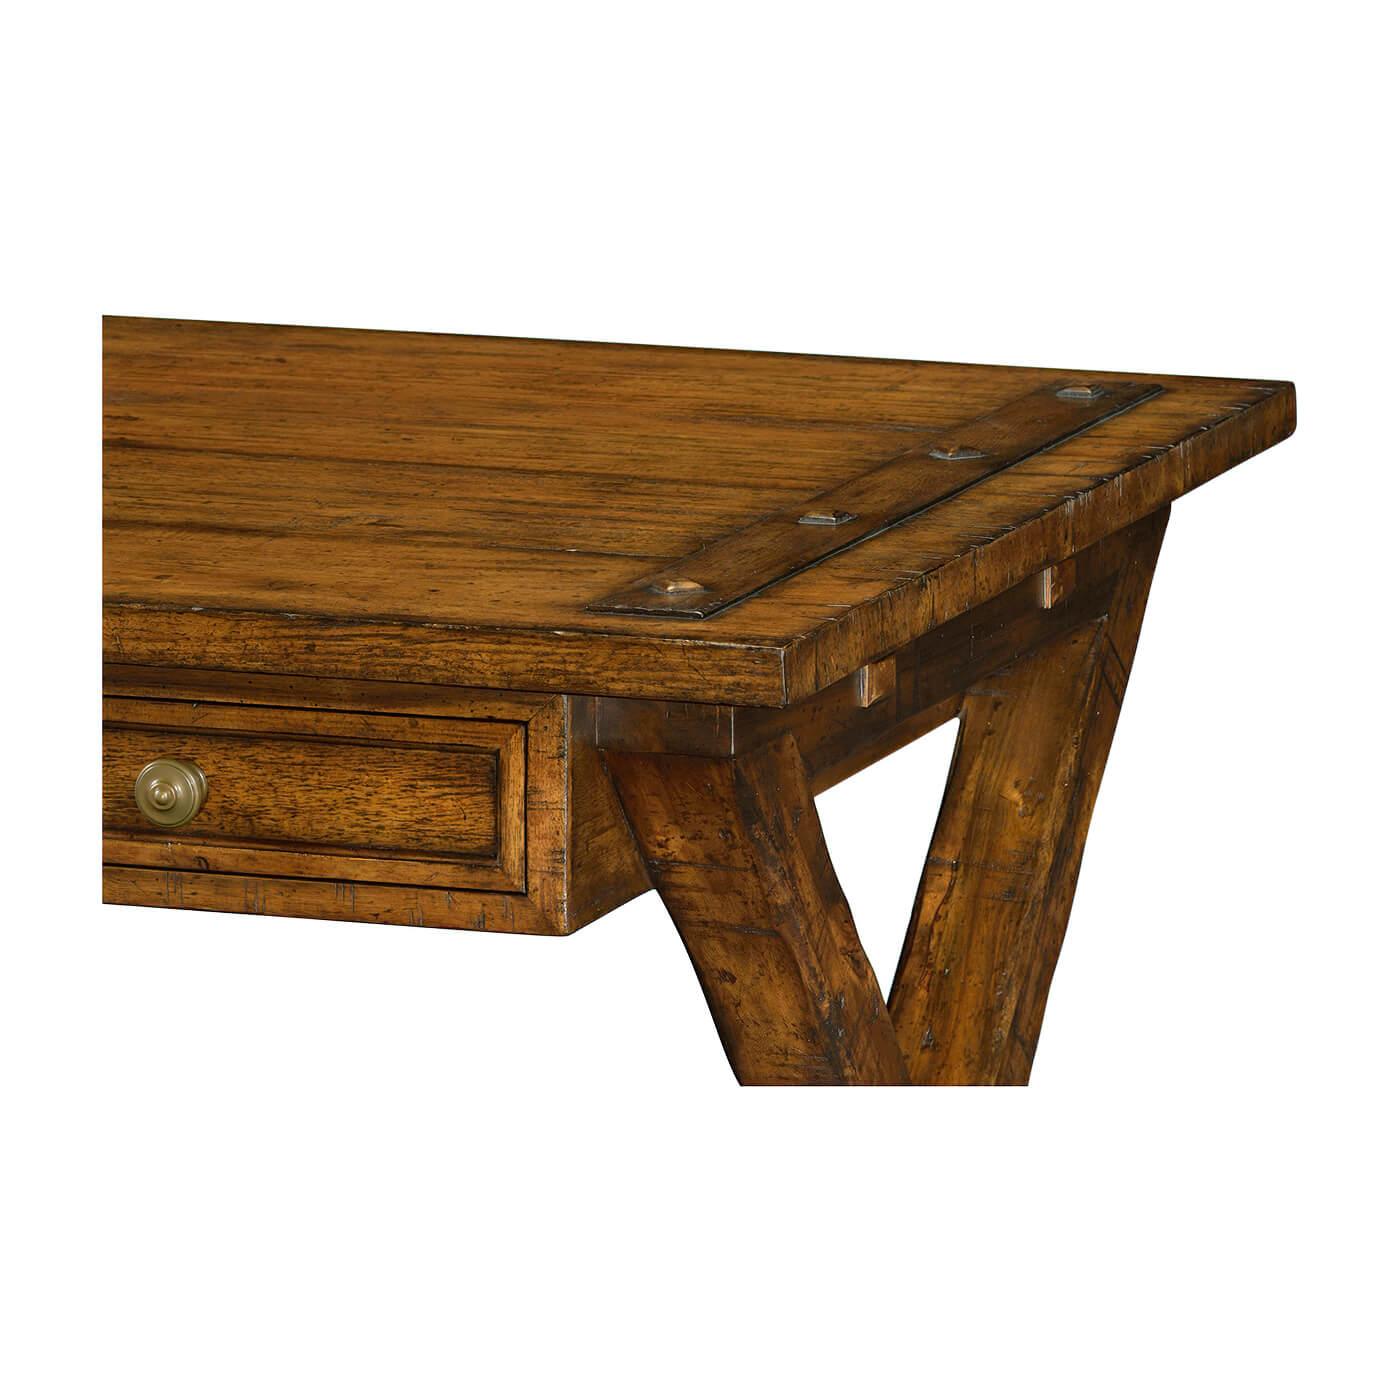 Vietnamese Rustic Country Walnut Desk For Sale